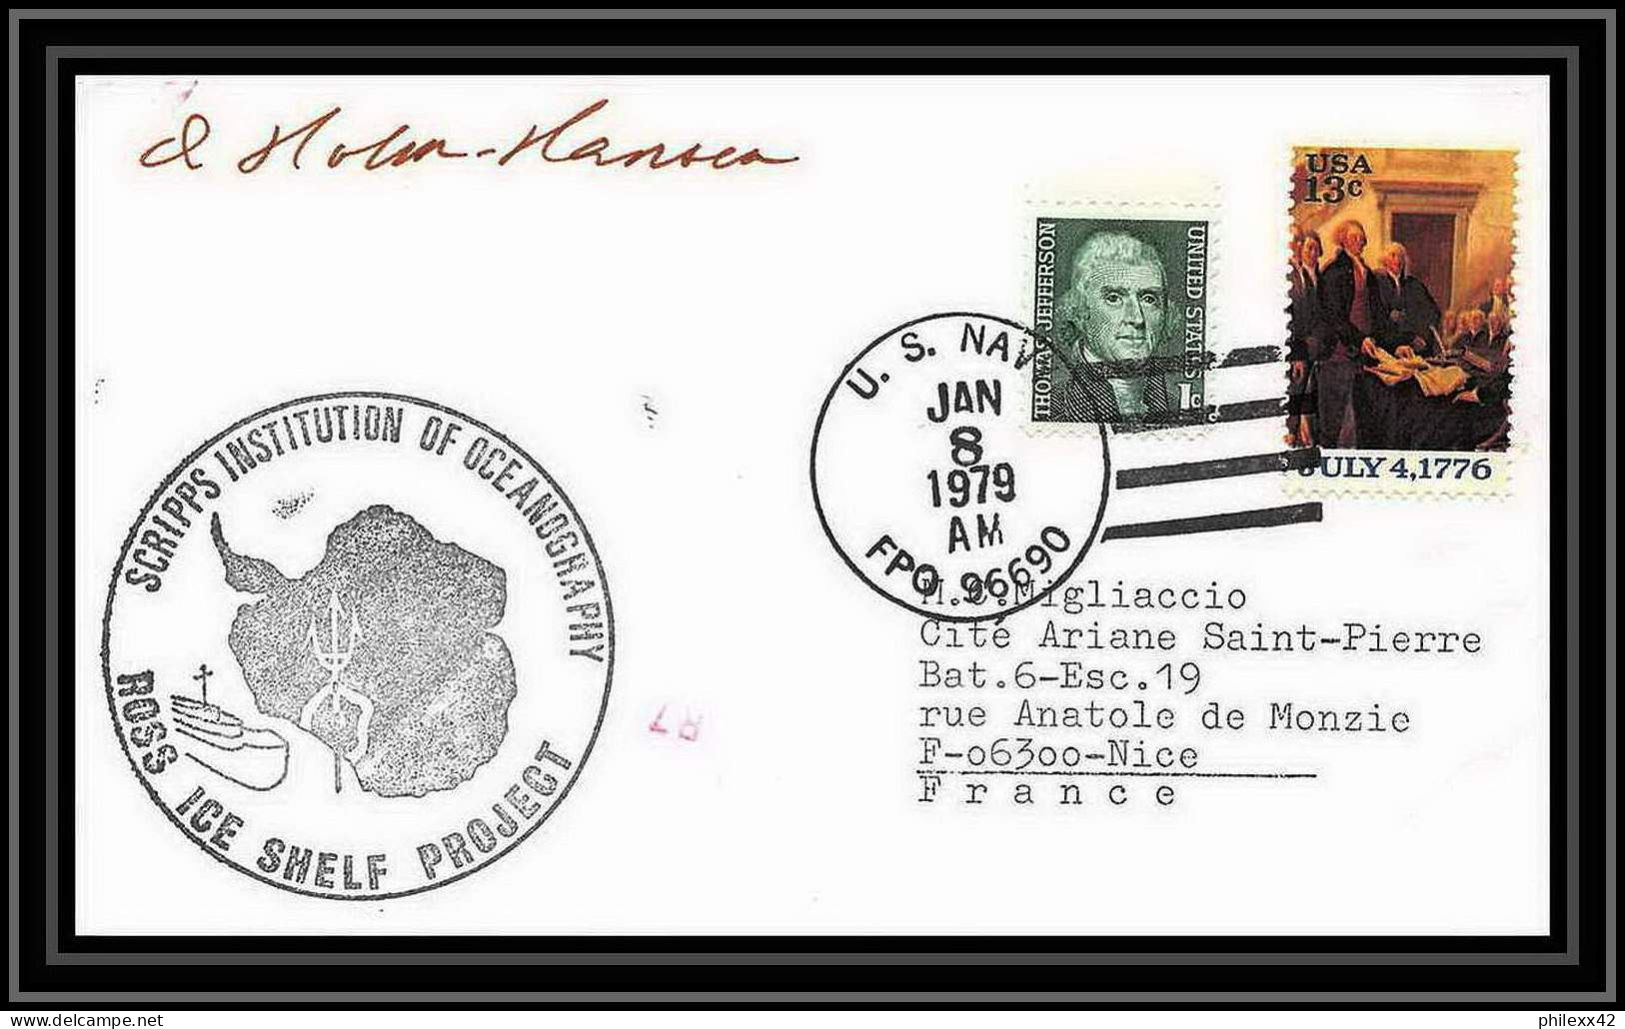 1976 Antarctic USA Lettre (cover) Ross Ice Shelf Project 8/1/1979 Signé Signed - Scientific Stations & Arctic Drifting Stations